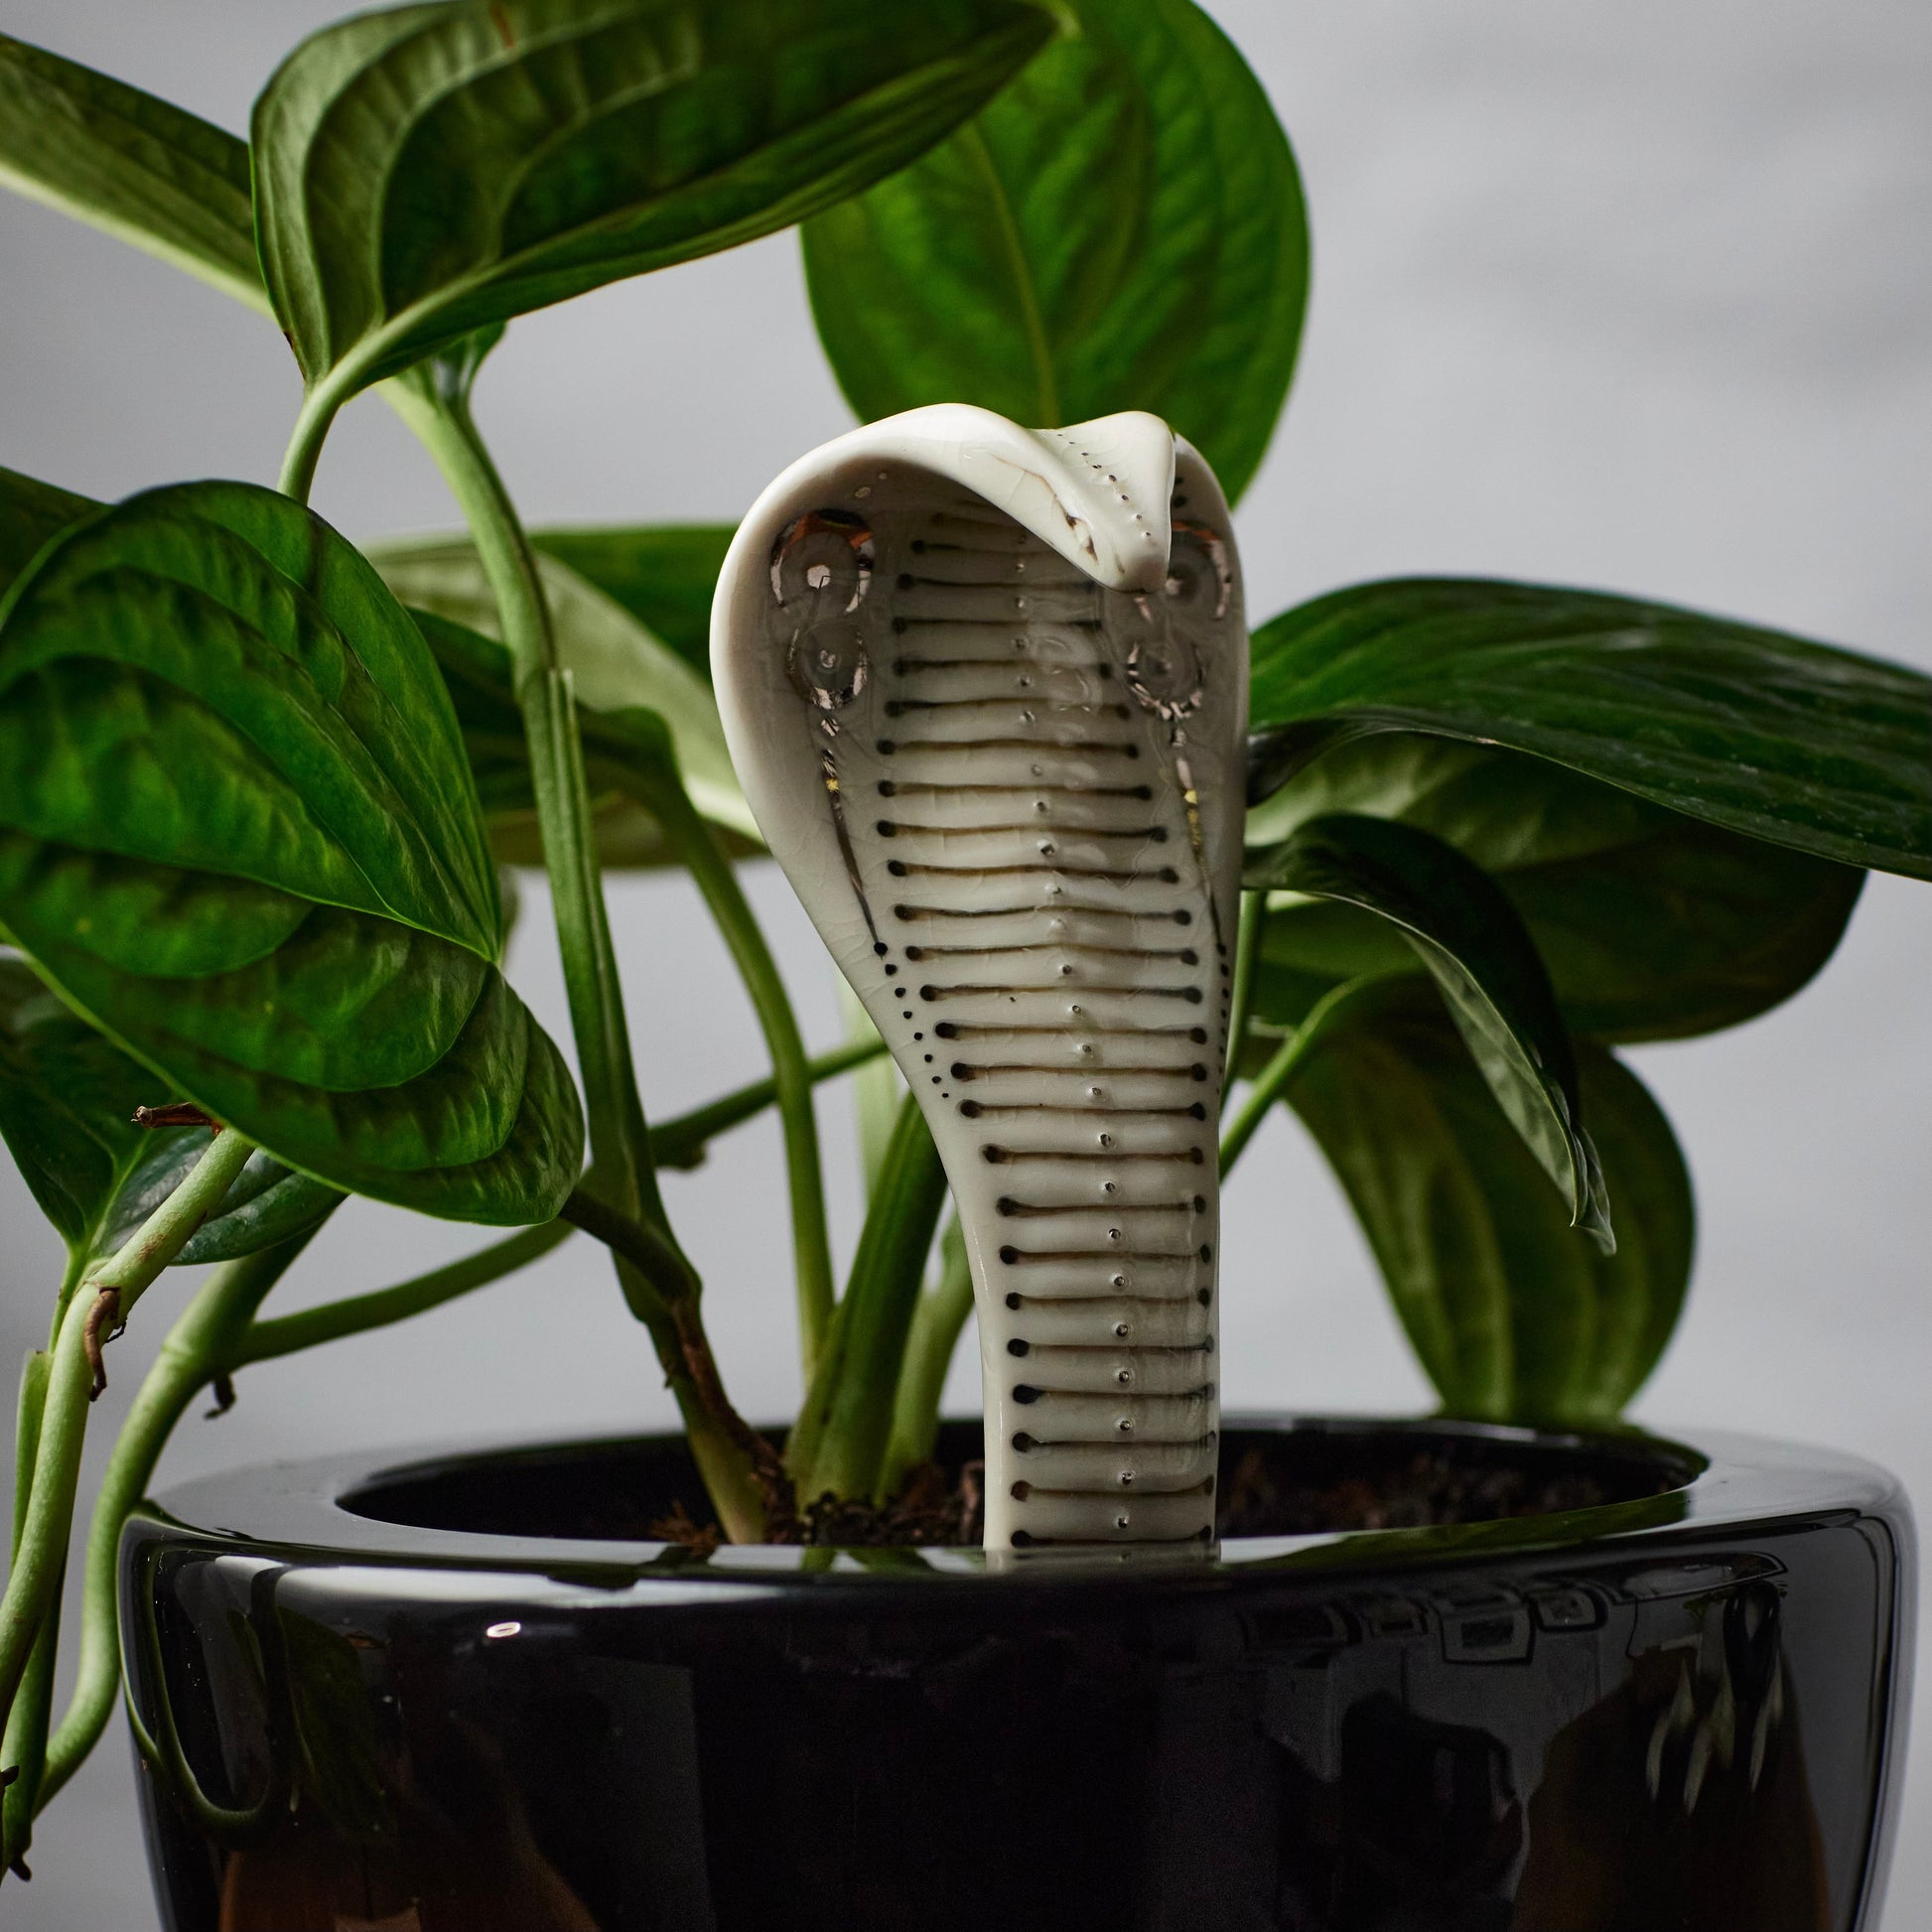 Planter Cobra 2 - Hand crafted Porcelain Plant Ornament. Snake with Detail & Brass Rod for planting.